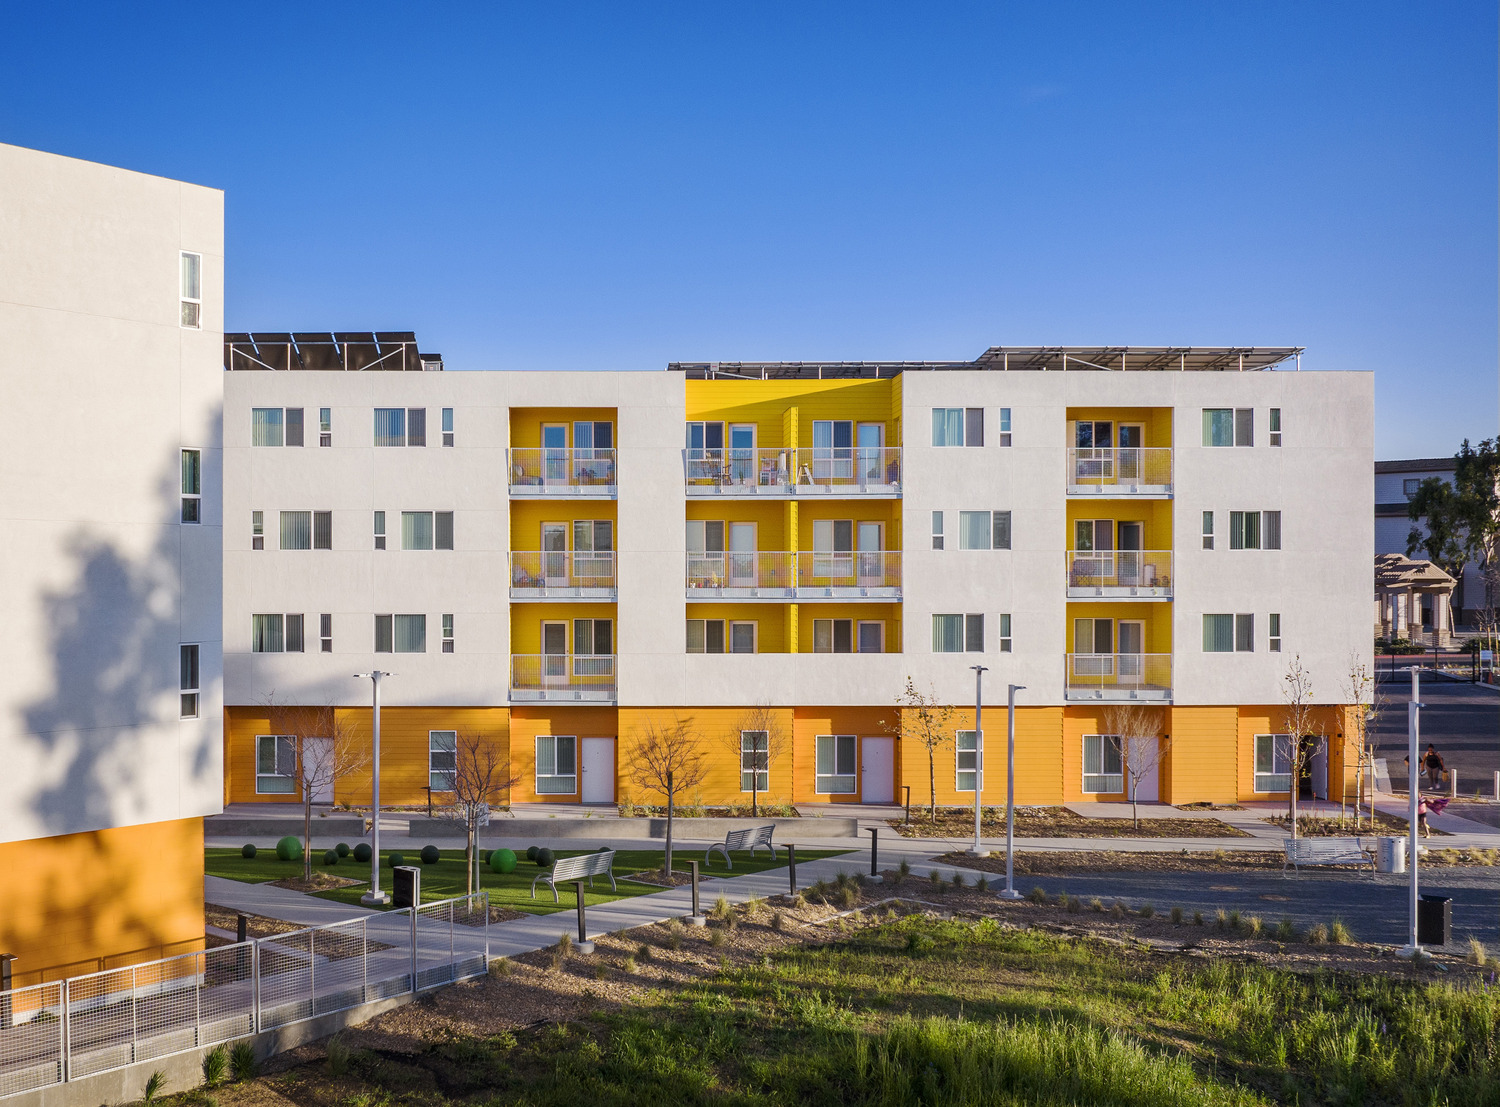 Keeler Court Apartments Recognized for High-Performing Sustainable Design